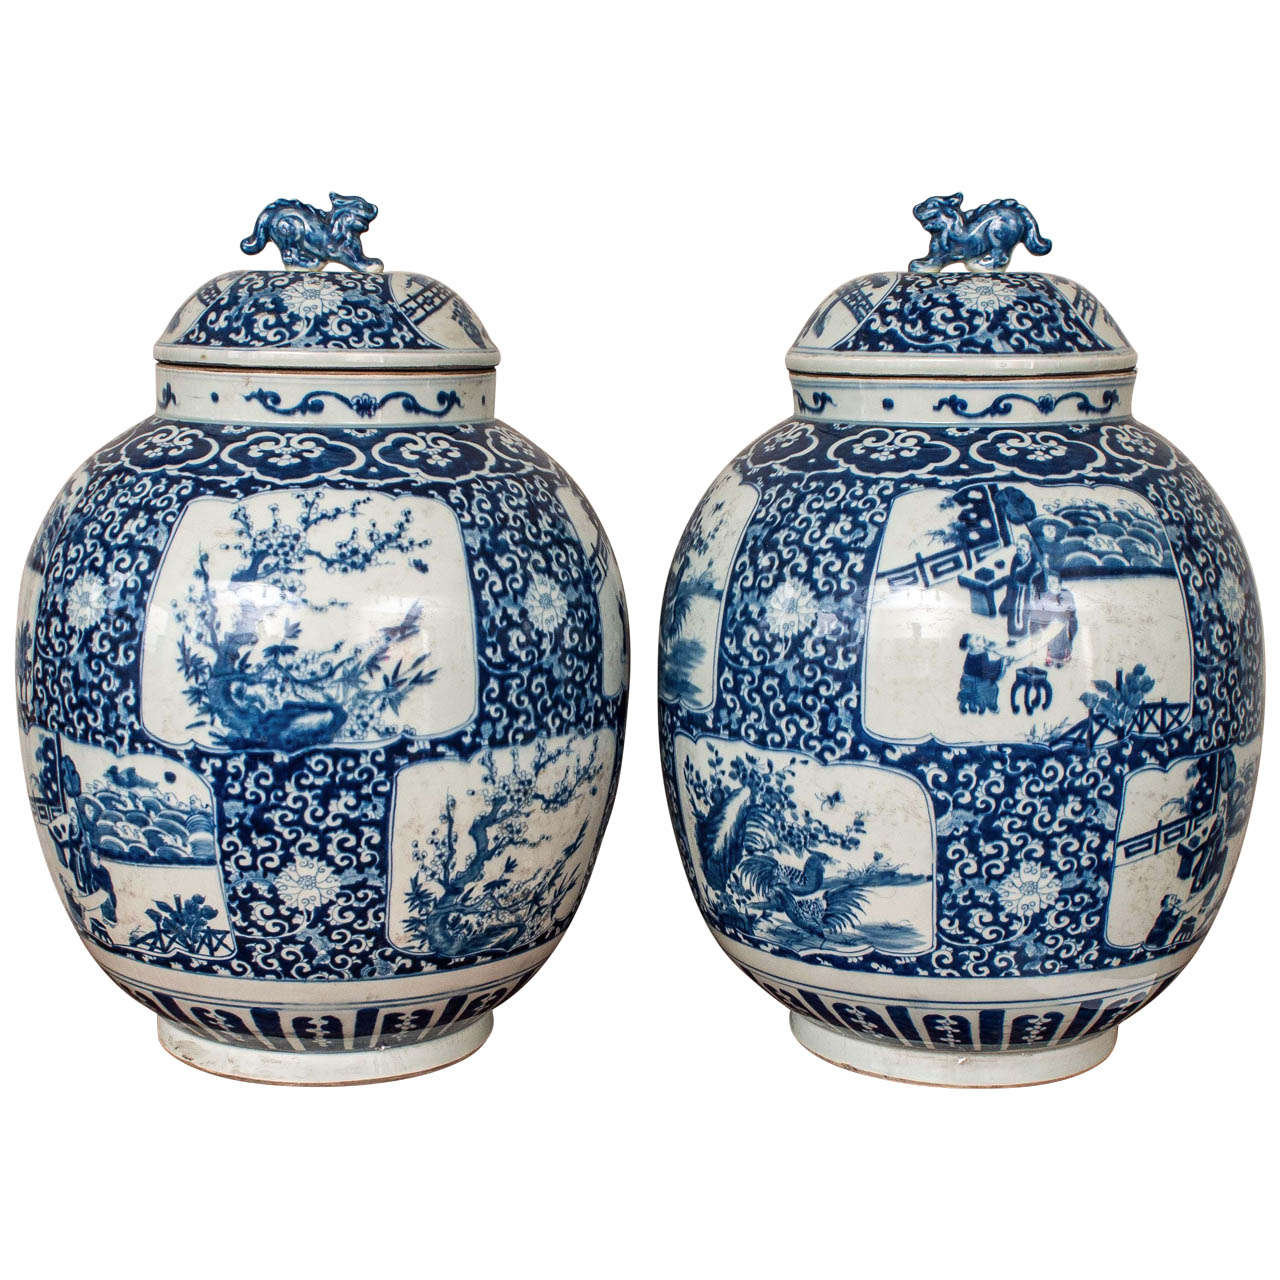 Pair of Large Chinese Blue and White Porcelain Temple Jars